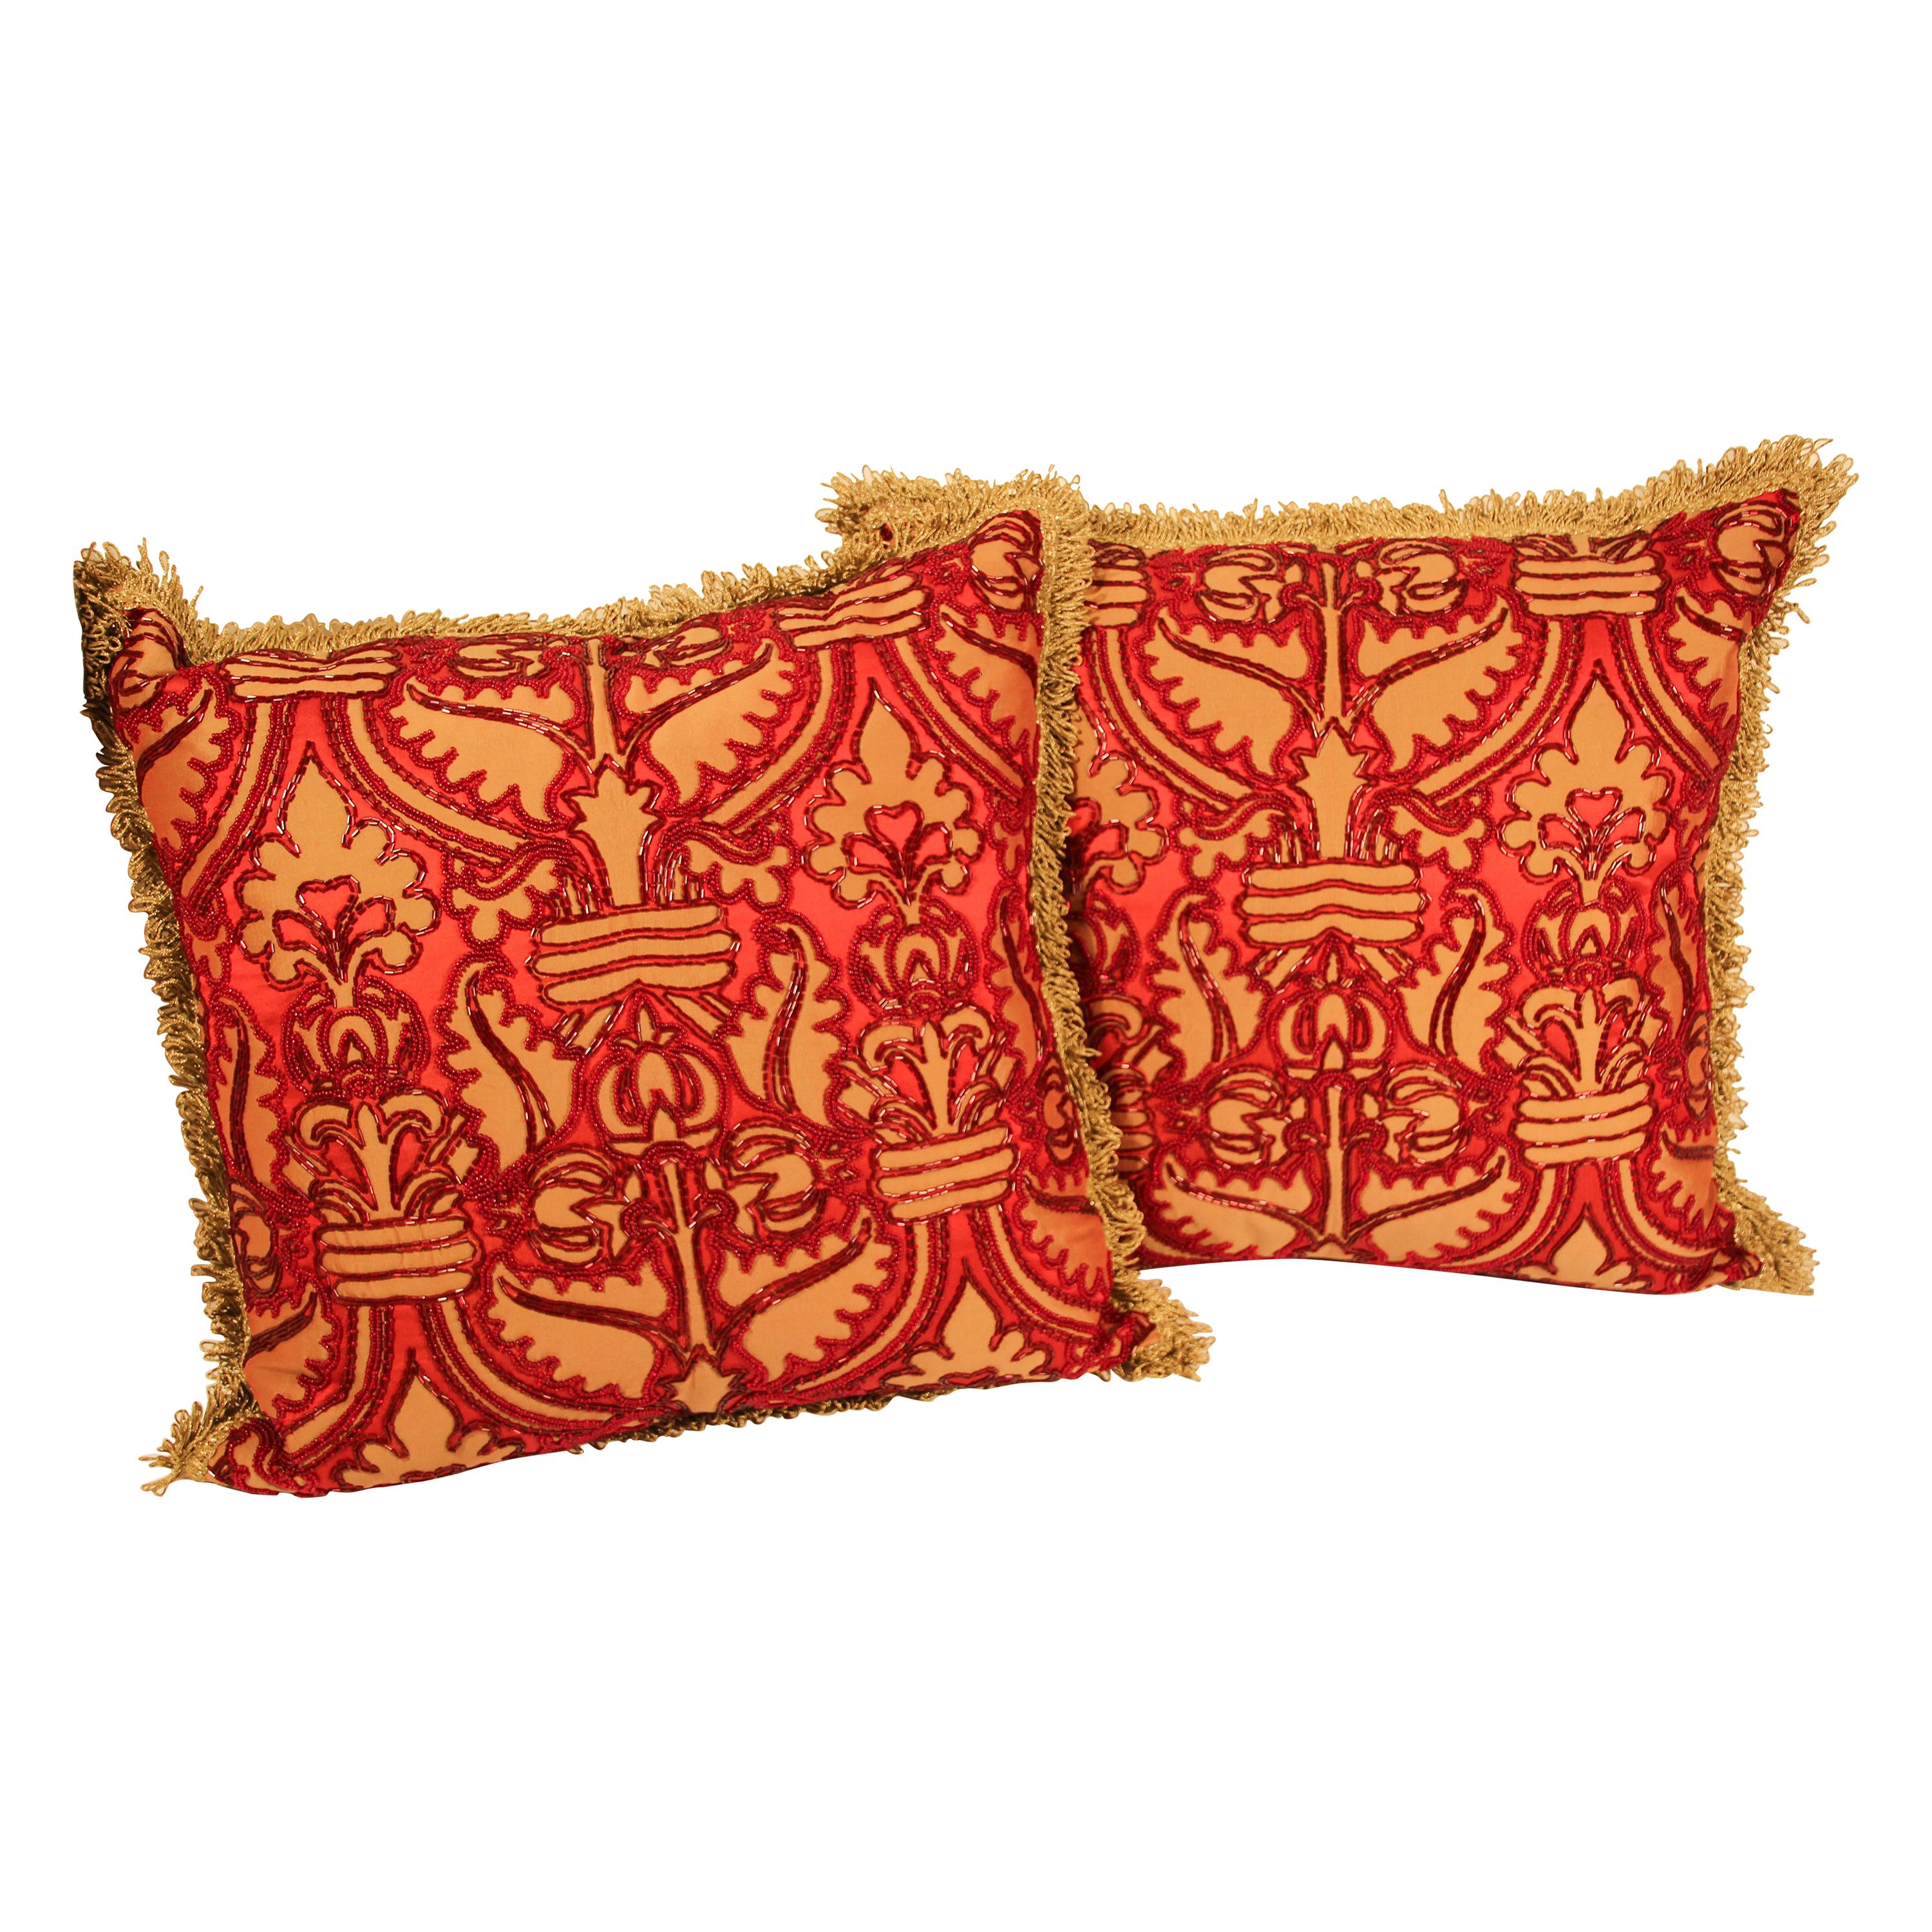 Pair of Large Silk Pillows with Metallic Threads and Red Beads